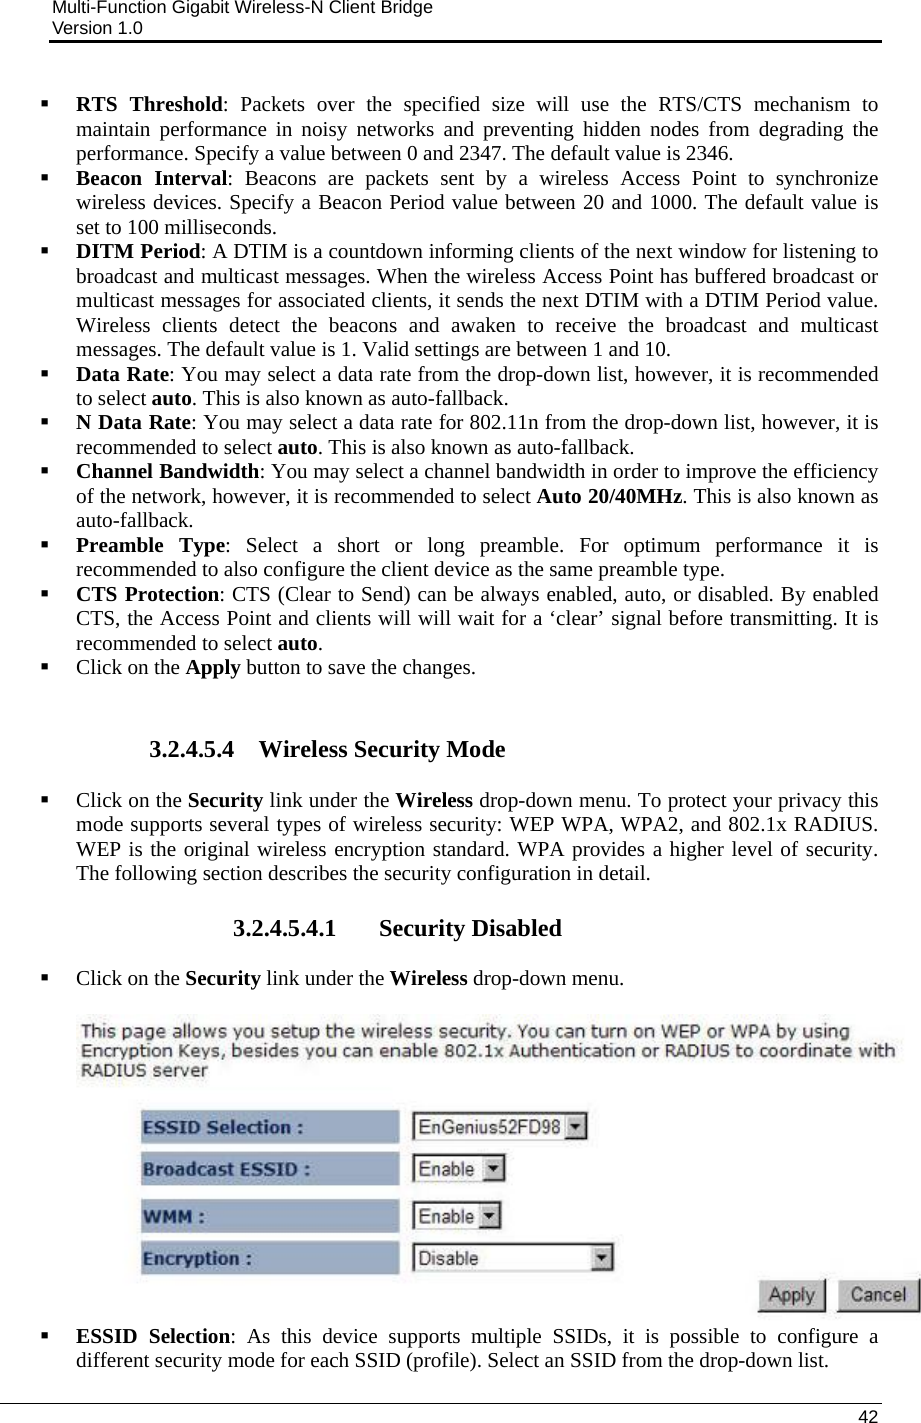 Multi-Function Gigabit Wireless-N Client Bridge                                         Version 1.0    42   RTS Threshold: Packets over the specified size will use the RTS/CTS mechanism to maintain performance in noisy networks and preventing hidden nodes from degrading the performance. Specify a value between 0 and 2347. The default value is 2346.  Beacon Interval: Beacons are packets sent by a wireless Access Point to synchronize wireless devices. Specify a Beacon Period value between 20 and 1000. The default value is set to 100 milliseconds.   DITM Period: A DTIM is a countdown informing clients of the next window for listening to broadcast and multicast messages. When the wireless Access Point has buffered broadcast or multicast messages for associated clients, it sends the next DTIM with a DTIM Period value. Wireless clients detect the beacons and awaken to receive the broadcast and multicast messages. The default value is 1. Valid settings are between 1 and 10.   Data Rate: You may select a data rate from the drop-down list, however, it is recommended to select auto. This is also known as auto-fallback.   N Data Rate: You may select a data rate for 802.11n from the drop-down list, however, it is recommended to select auto. This is also known as auto-fallback.   Channel Bandwidth: You may select a channel bandwidth in order to improve the efficiency of the network, however, it is recommended to select Auto 20/40MHz. This is also known as auto-fallback.   Preamble Type: Select a short or long preamble. For optimum performance it is recommended to also configure the client device as the same preamble type.   CTS Protection: CTS (Clear to Send) can be always enabled, auto, or disabled. By enabled CTS, the Access Point and clients will will wait for a ‘clear’ signal before transmitting. It is recommended to select auto.   Click on the Apply button to save the changes.    3.2.4.5.4 Wireless Security Mode  Click on the Security link under the Wireless drop-down menu. To protect your privacy this mode supports several types of wireless security: WEP WPA, WPA2, and 802.1x RADIUS. WEP is the original wireless encryption standard. WPA provides a higher level of security. The following section describes the security configuration in detail.   3.2.4.5.4.1 Security Disabled  Click on the Security link under the Wireless drop-down menu.     ESSID Selection: As this device supports multiple SSIDs, it is possible to configure a different security mode for each SSID (profile). Select an SSID from the drop-down list.  